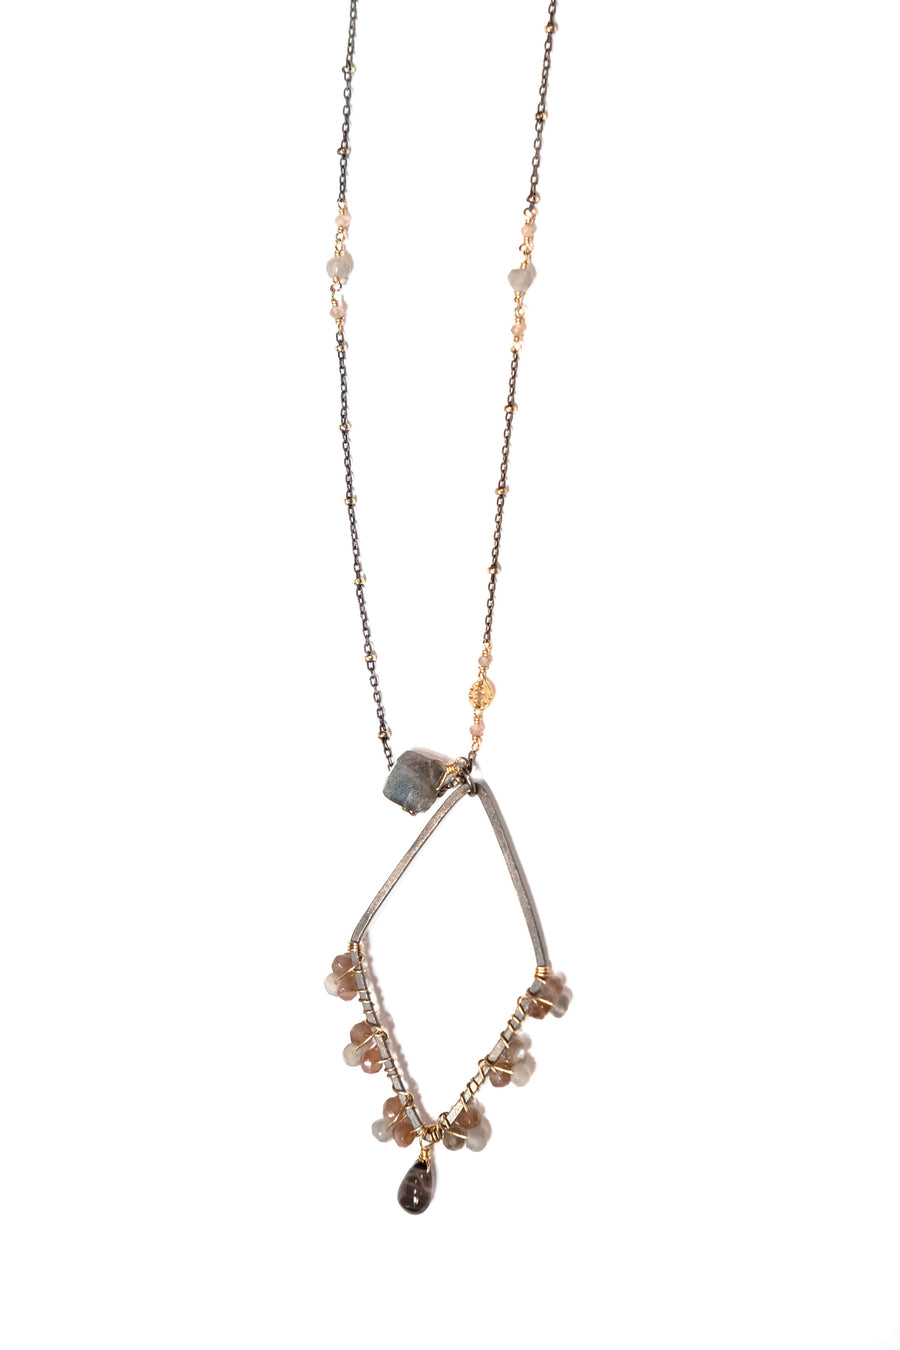 Diamond Shaped Pendant of Labradorite and Moonstone Necklace by Calliope